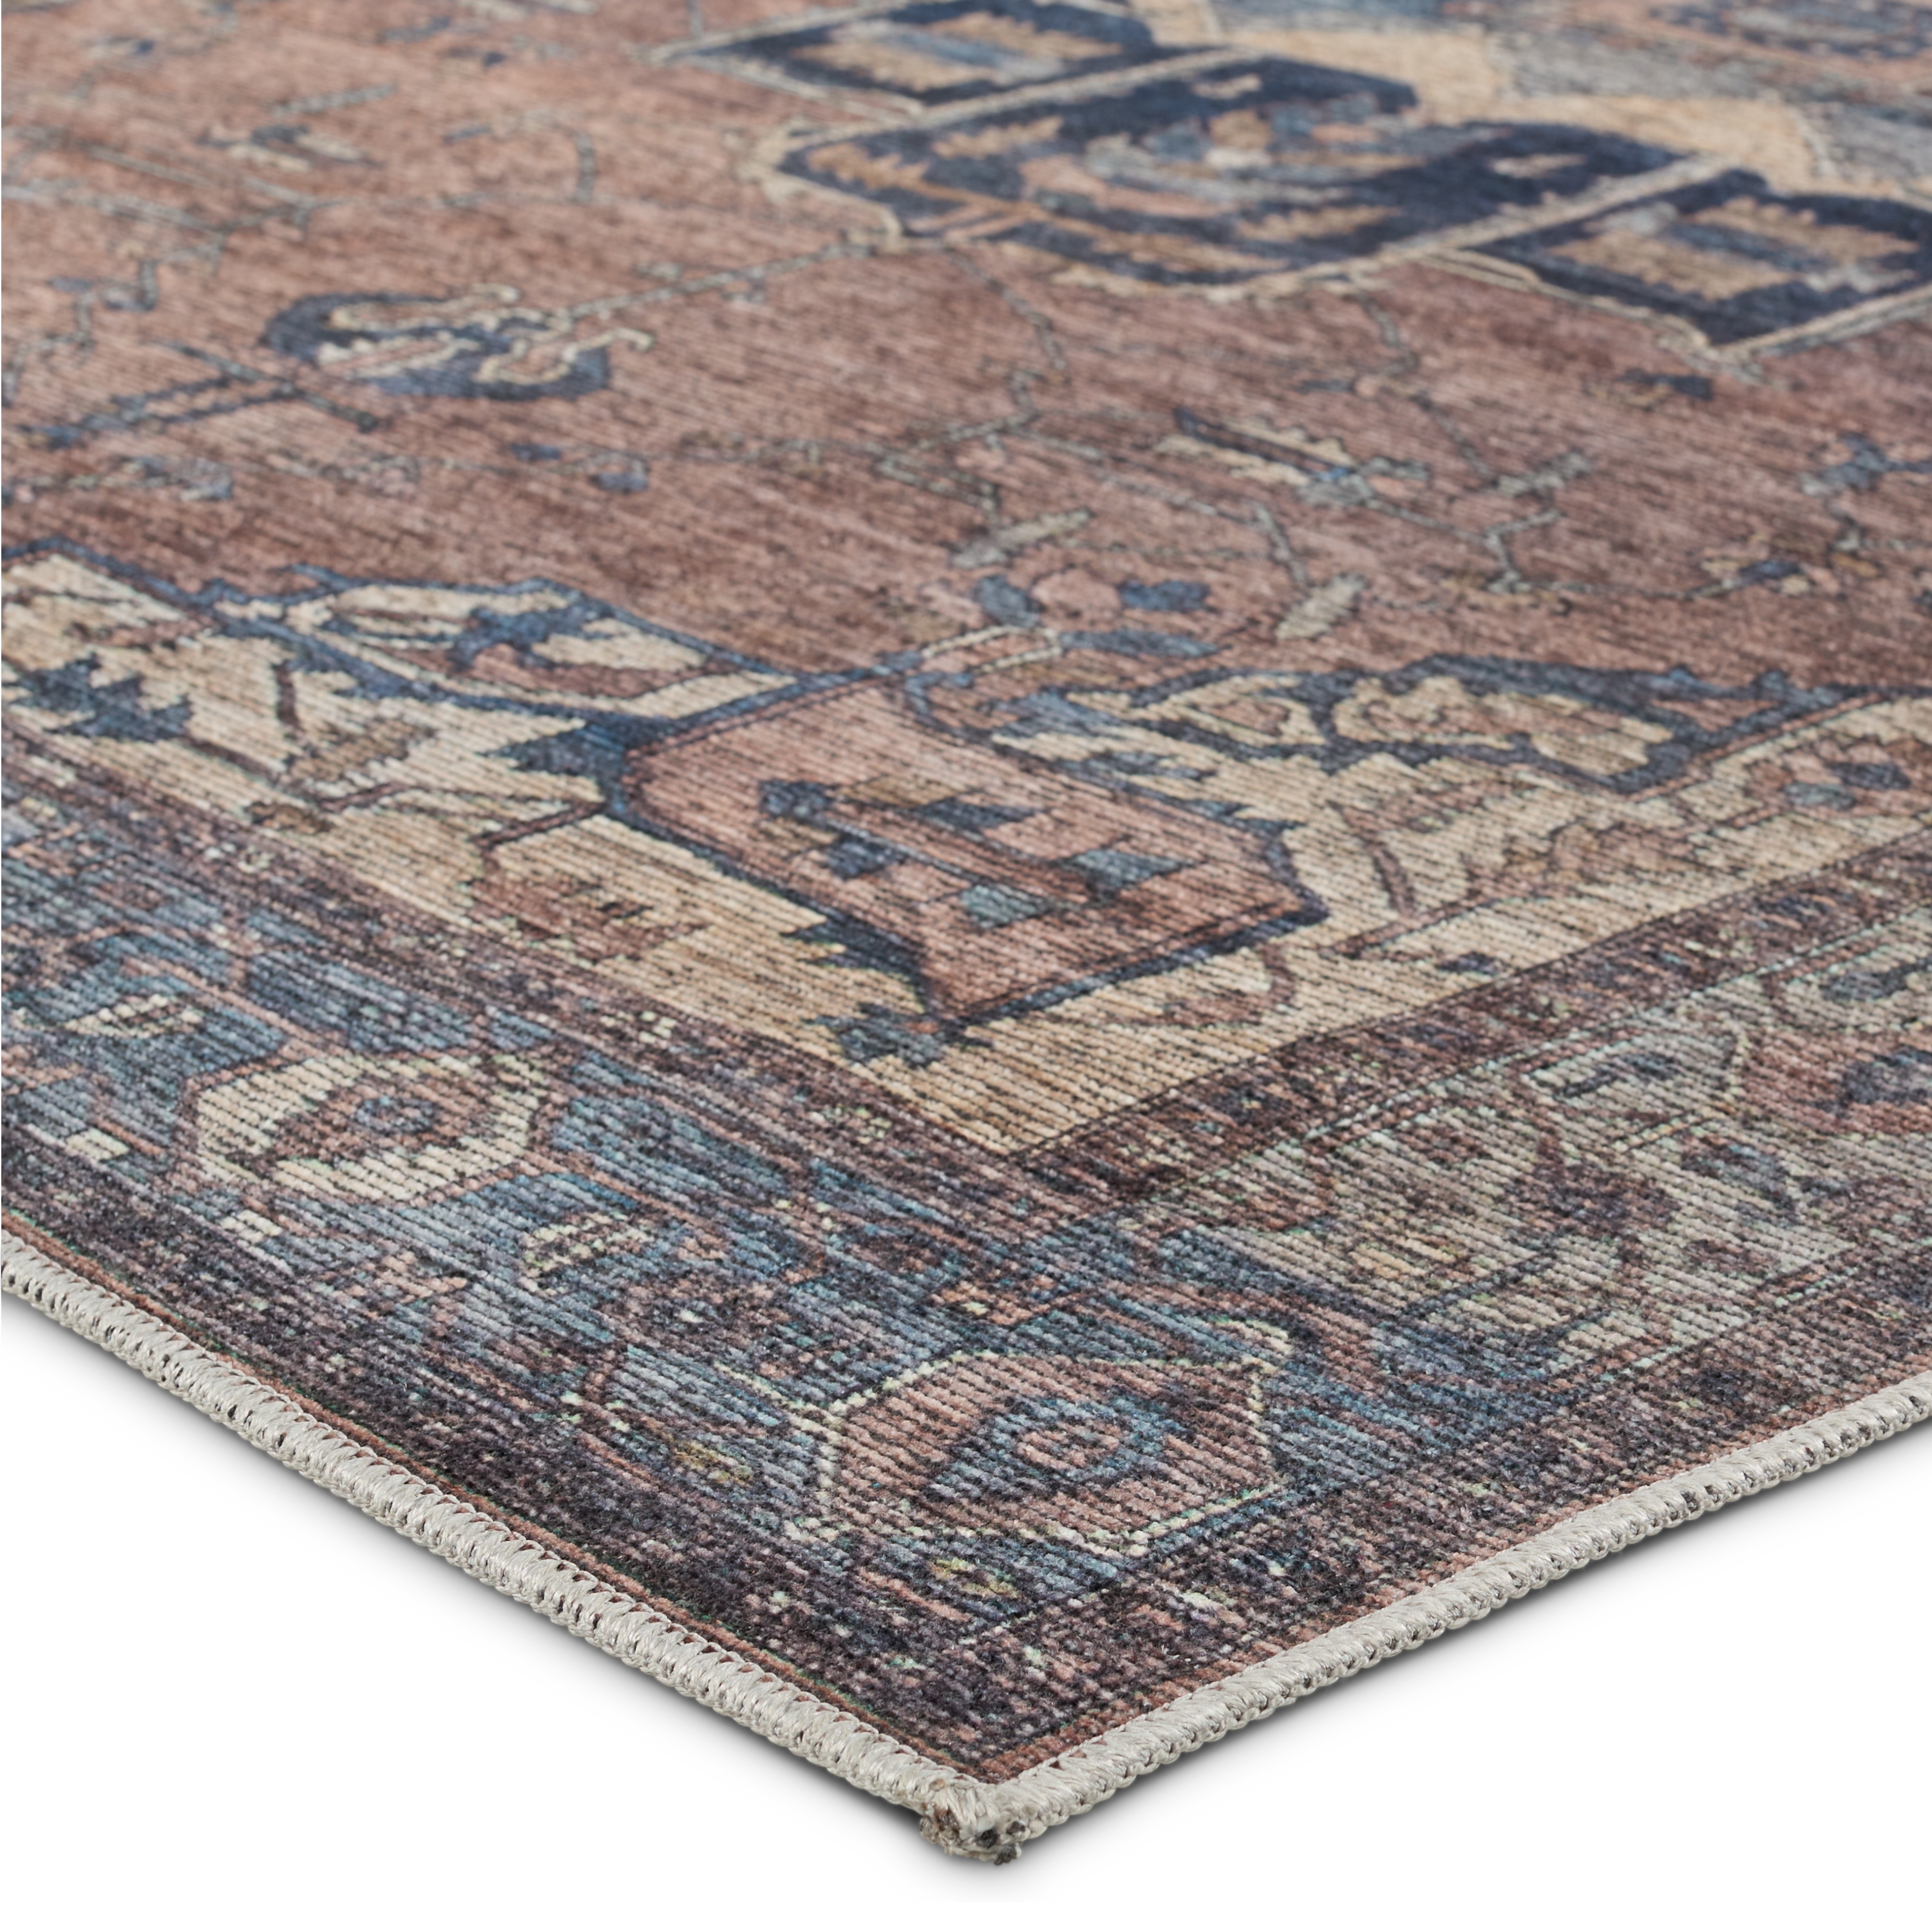 Vibe by Barrymore Medallion Blue/ Dark Brown Area Rug (5'3"X8') - Image 1